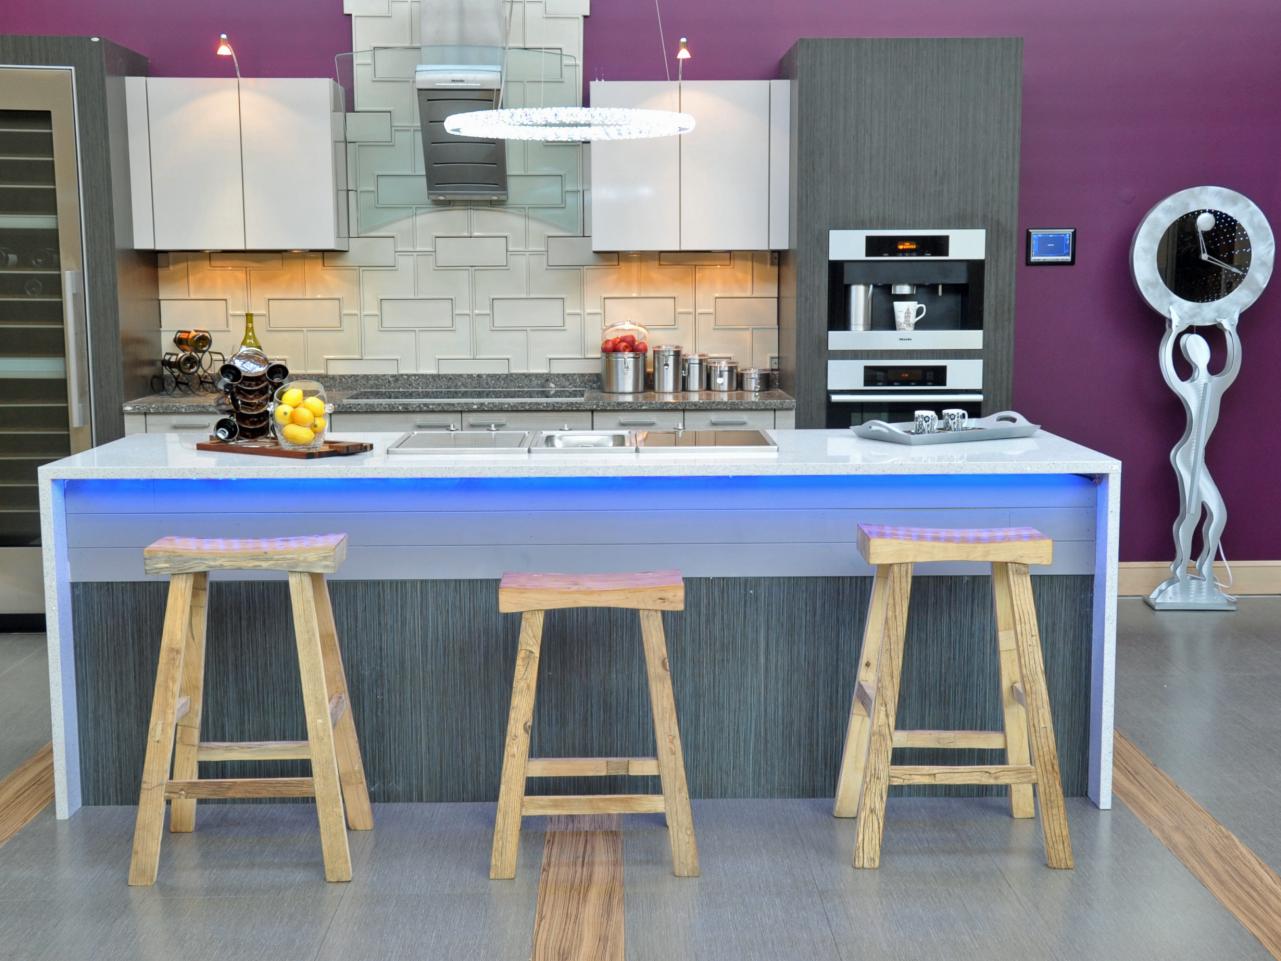 8 Purple Paint Colors That Work Well in a Kitchen